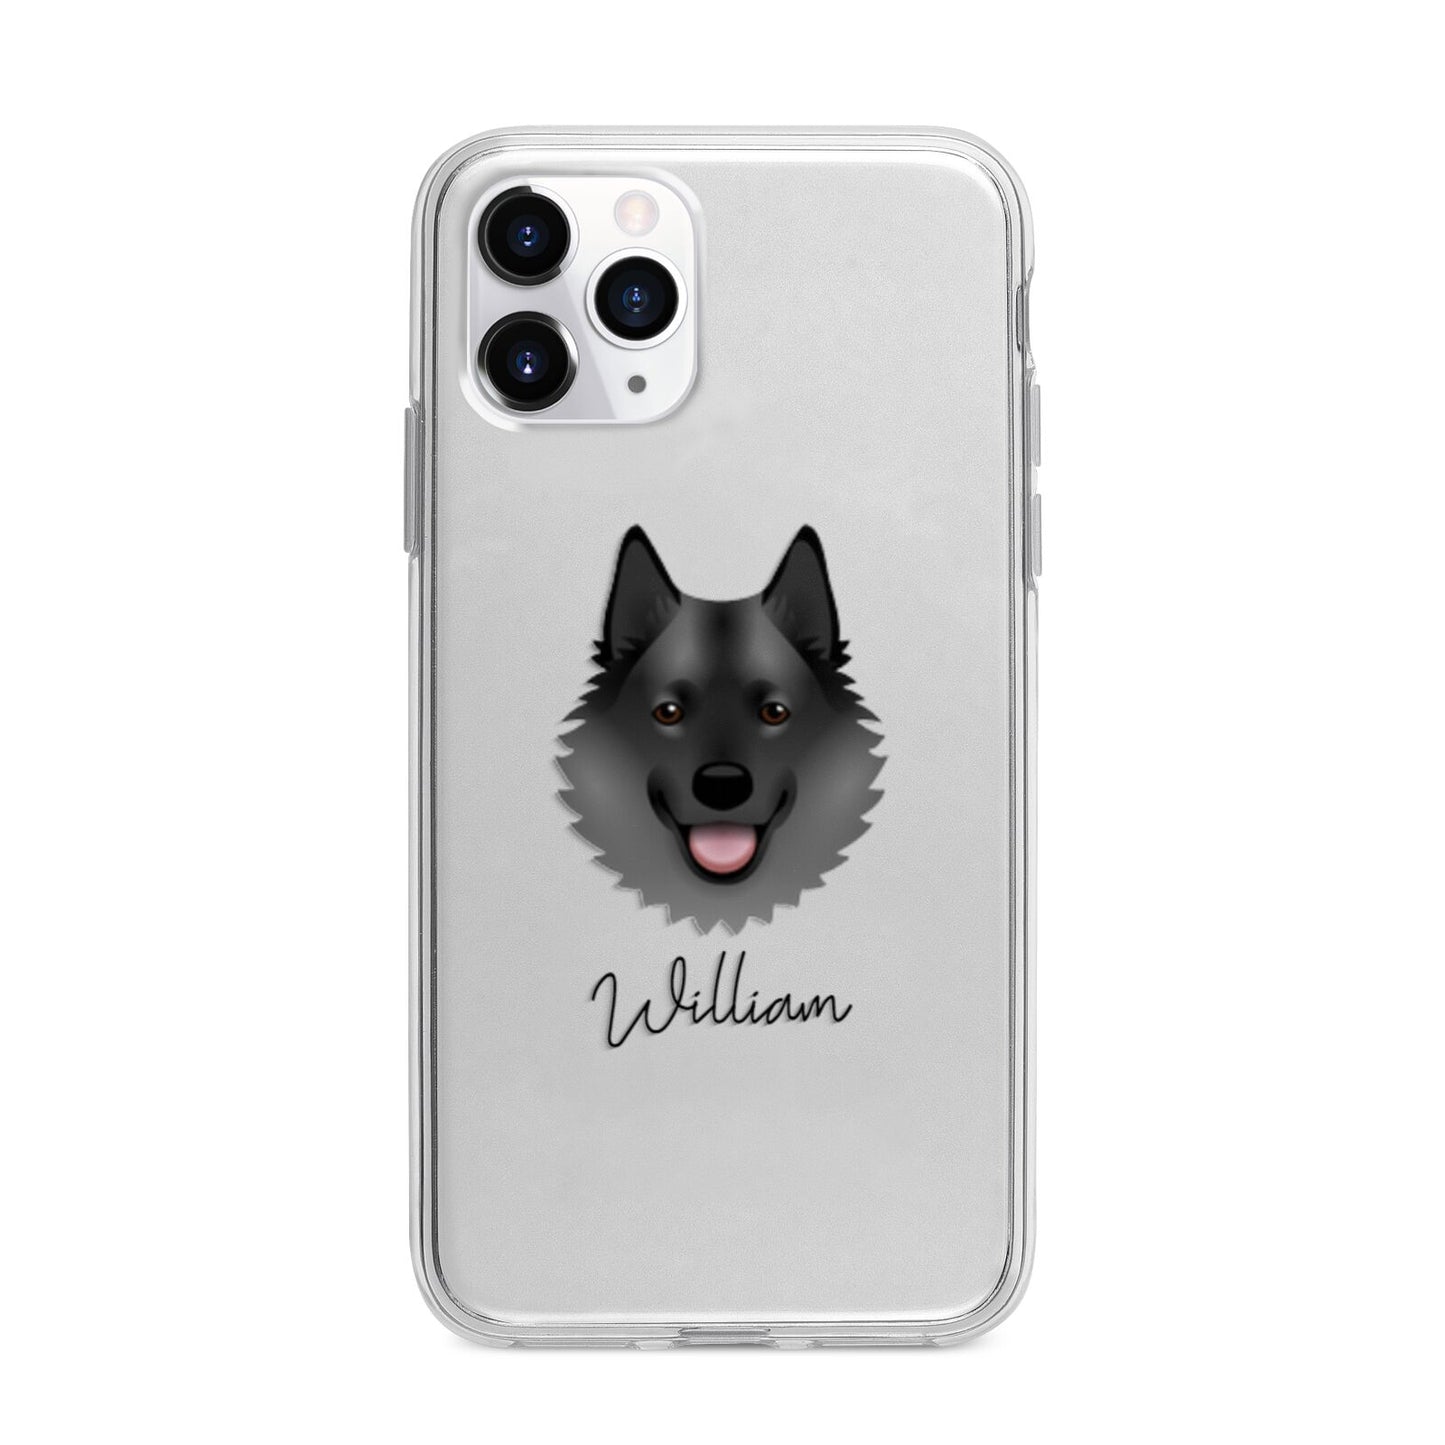 Norwegian Elkhound Personalised Apple iPhone 11 Pro Max in Silver with Bumper Case